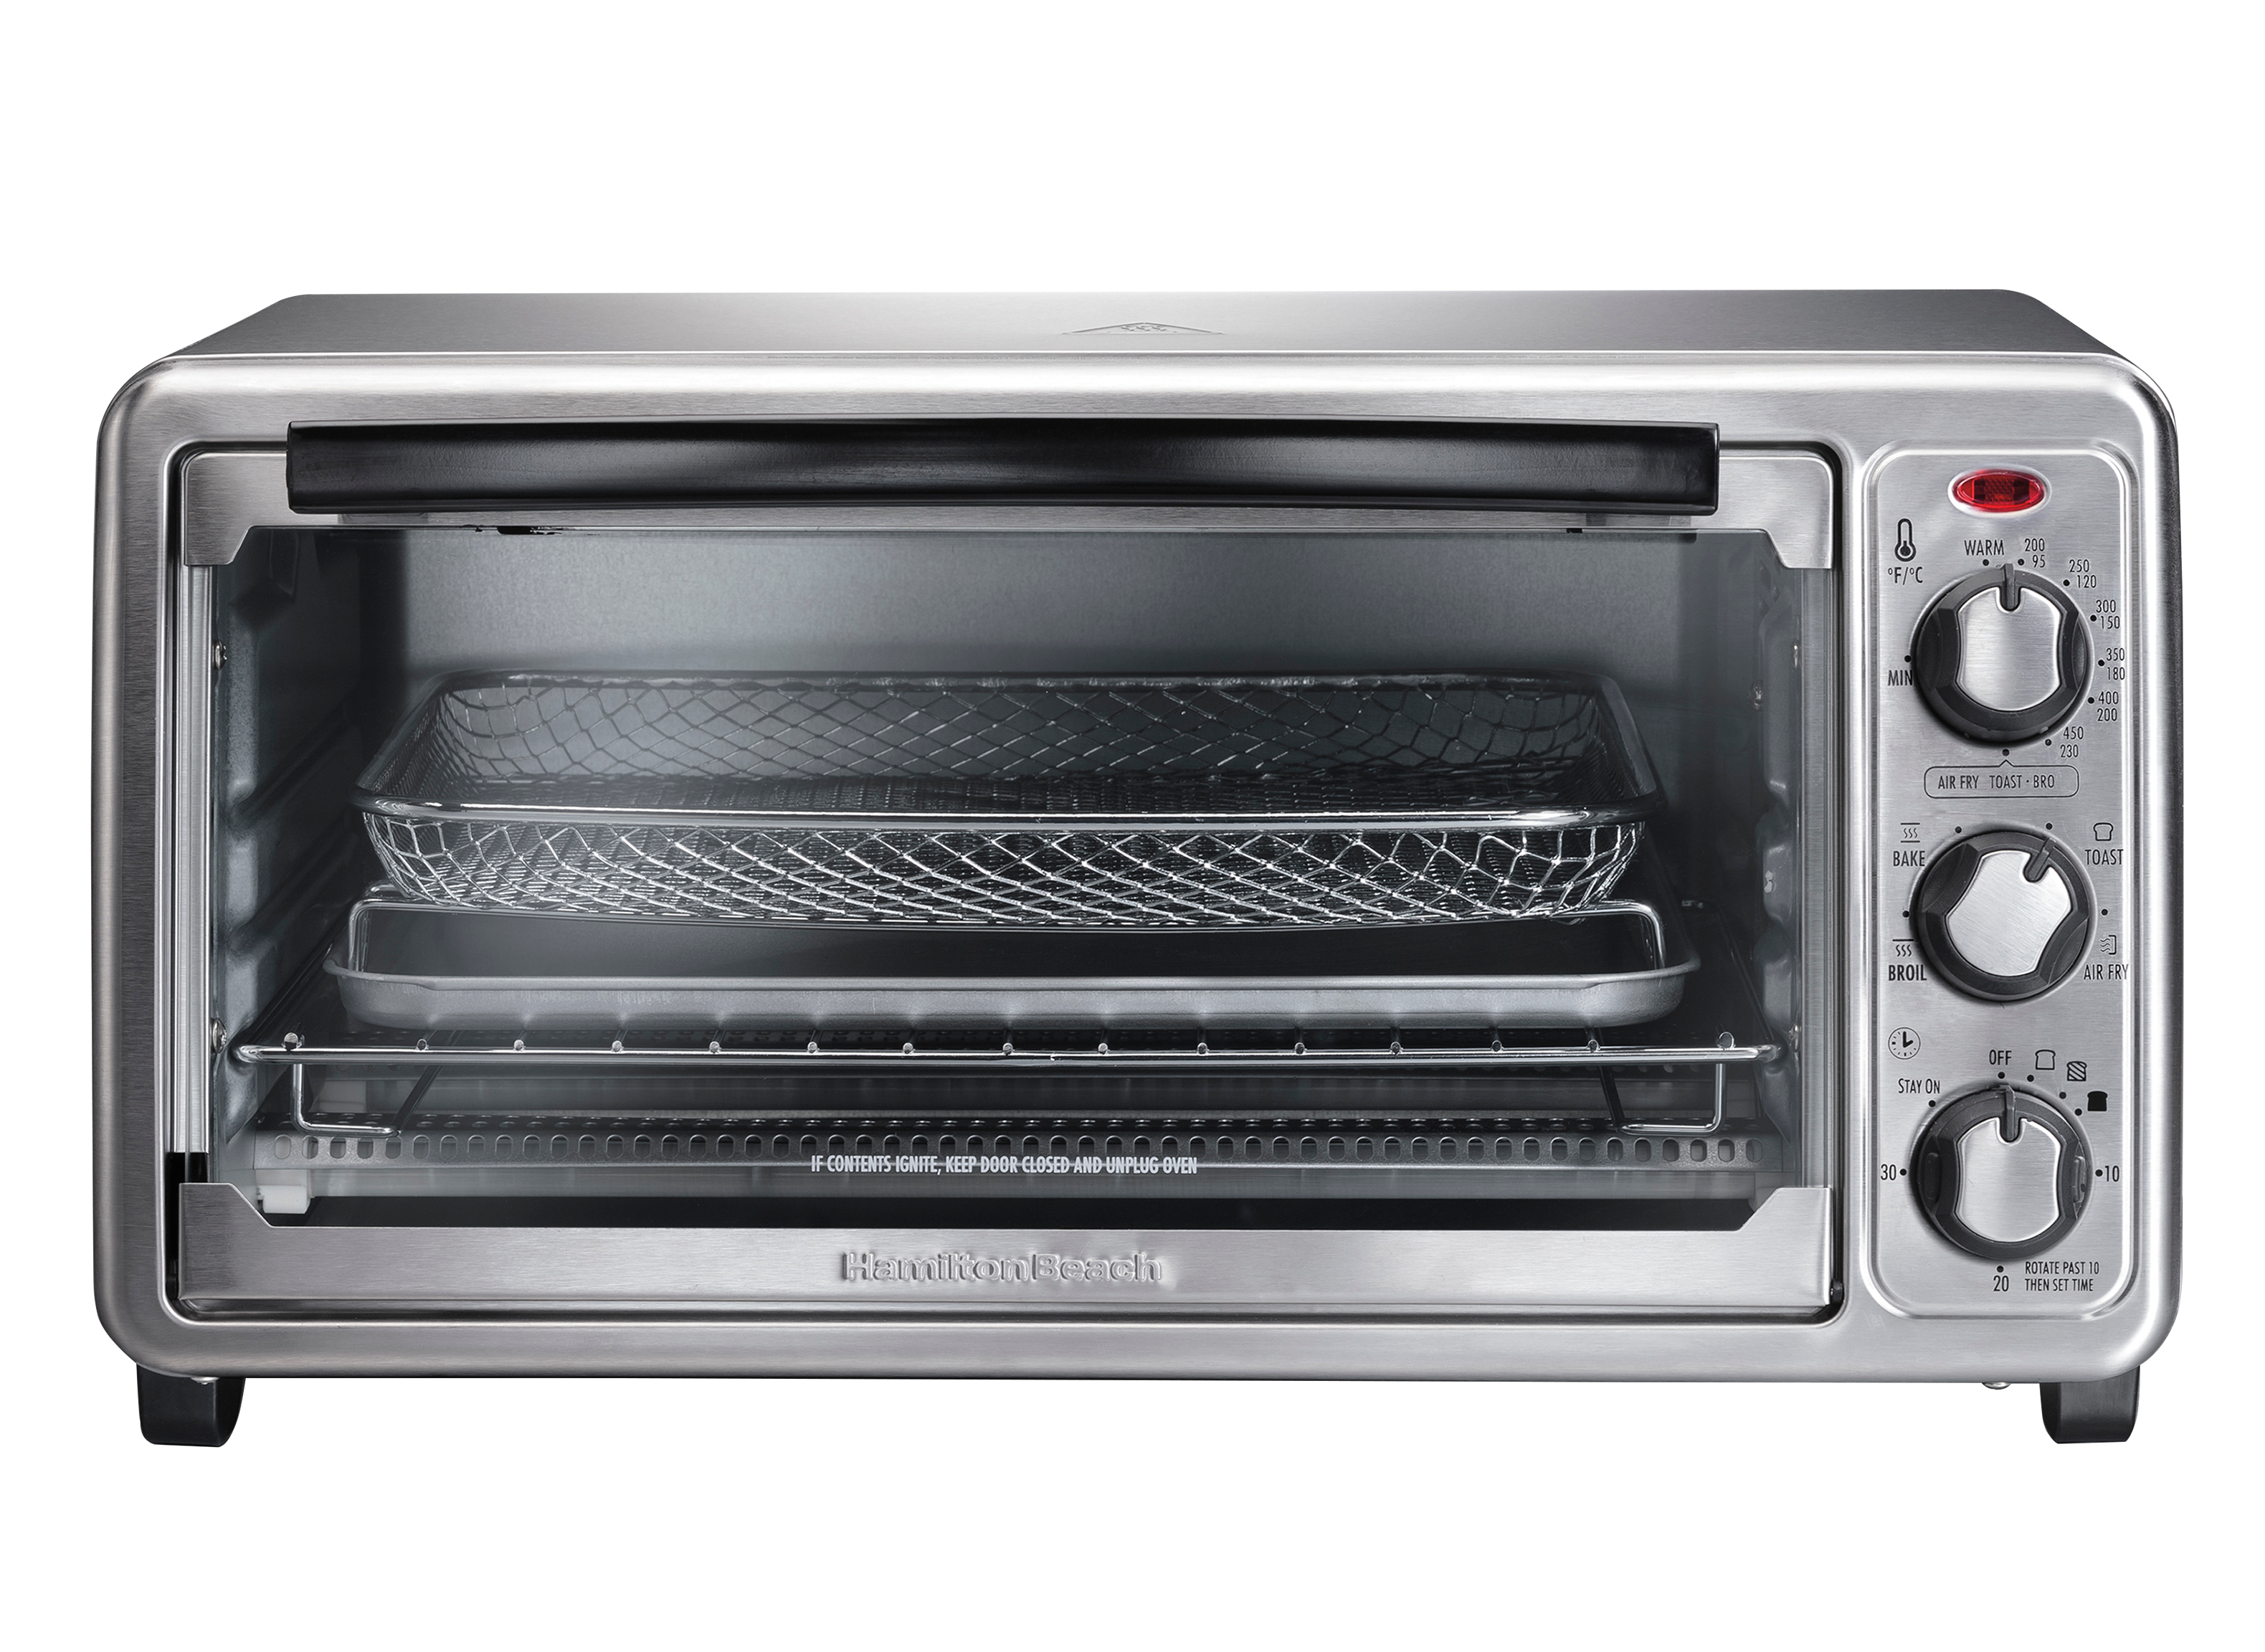 https://crdms.images.consumerreports.org/prod/products/cr/models/403712-toaster-ovens-hamilton-beach-sure-crisp-31413-10020848.png